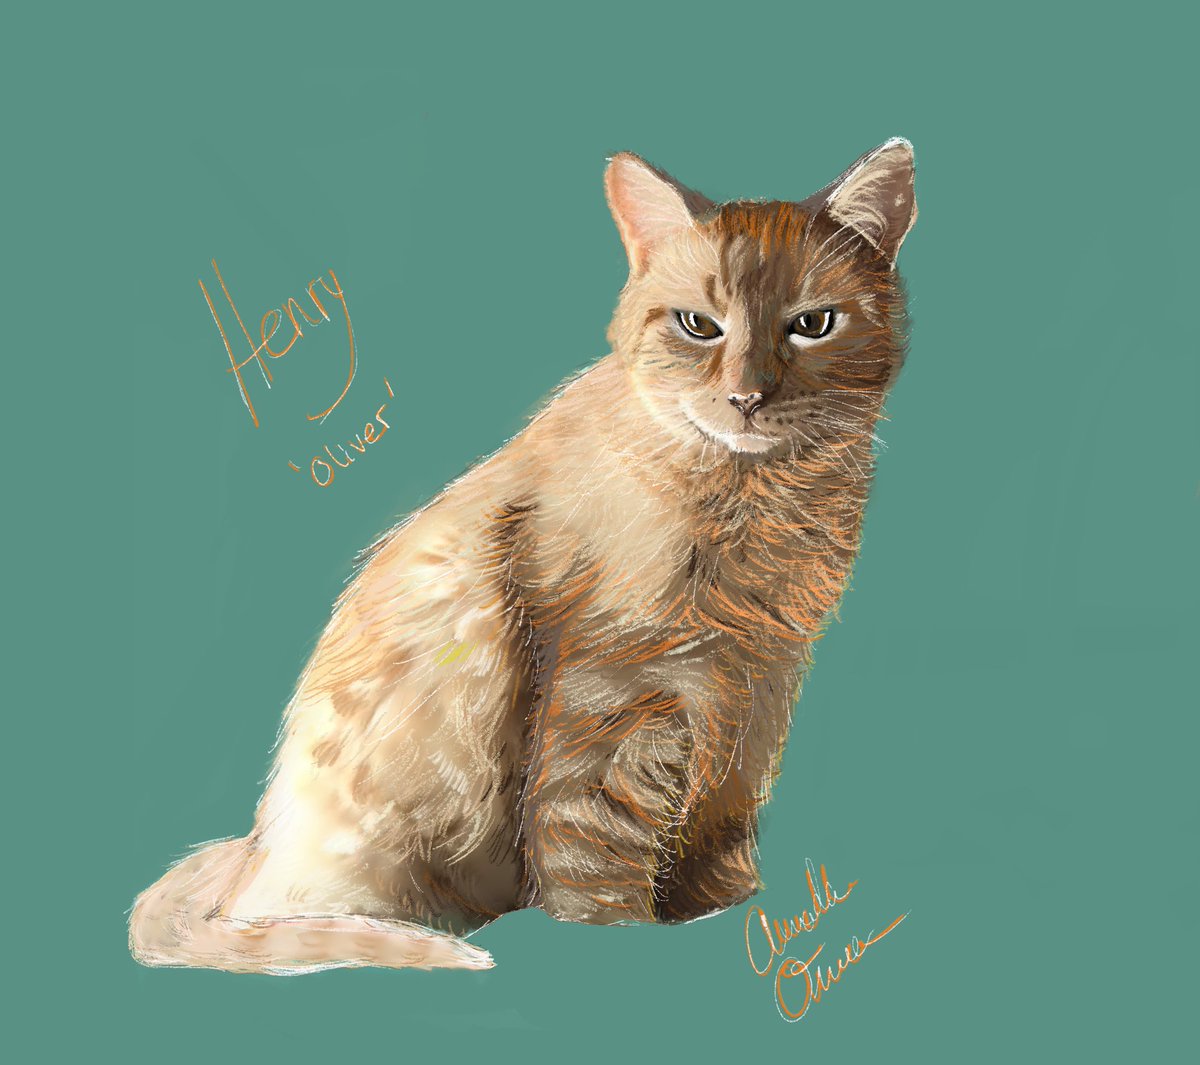 Its day 3 for me, with ol' mr Henry!
#catember20 #catember #CatsOfTwitter #art #Sketchtember #Cat